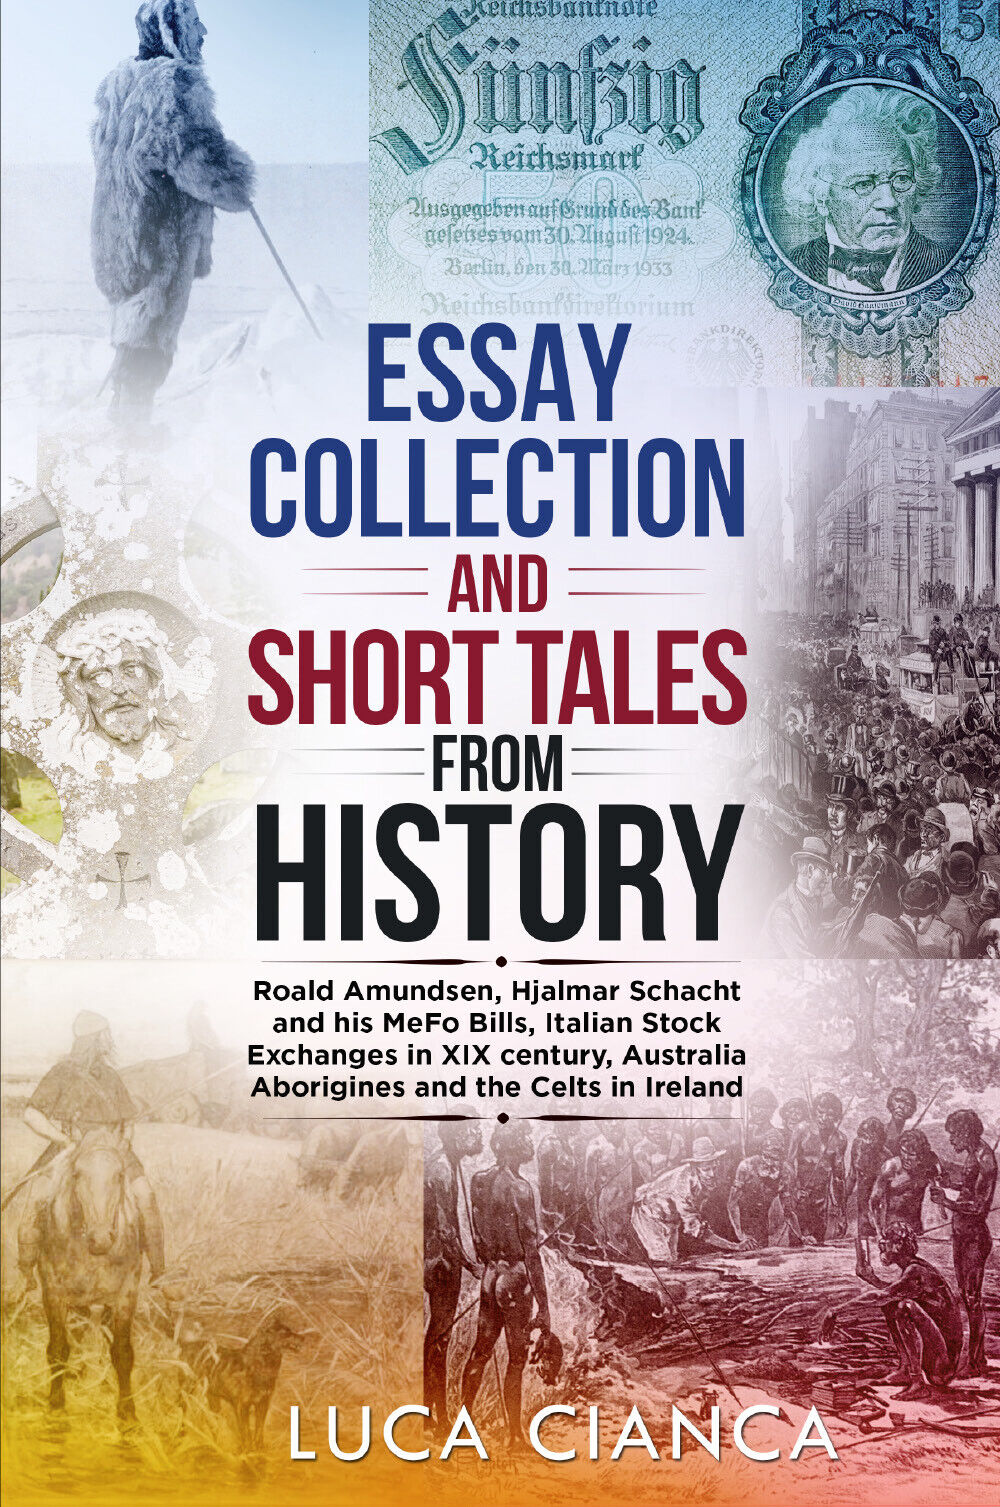 ESSAY COLLECTION AND SHORT TALES FROM HISTORY di Luca Cianca,  2021,  Youcanprin libro usato